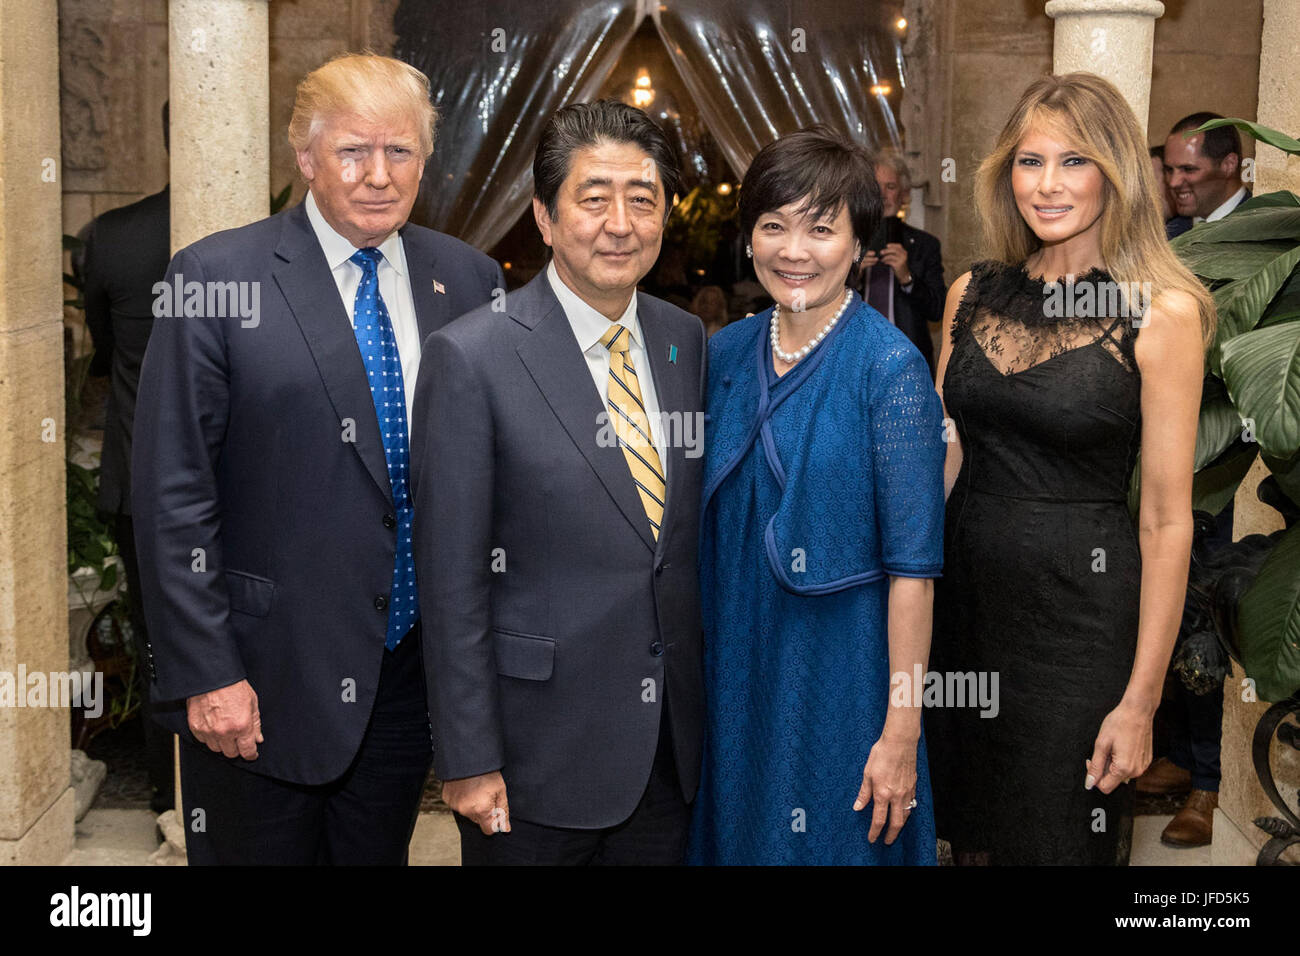 President Donald Trump and First Lady Melania Trump, are joined by Japanese Prime Minister Shinzō Abe, and his wife, Mrs. Akie Abe, as they pose for photos Saturday, Feb. 11, 2017, at Mar-a-Lago in Palm Beach, FL. (Official White House Photo by Shealah Craighead) Stock Photo